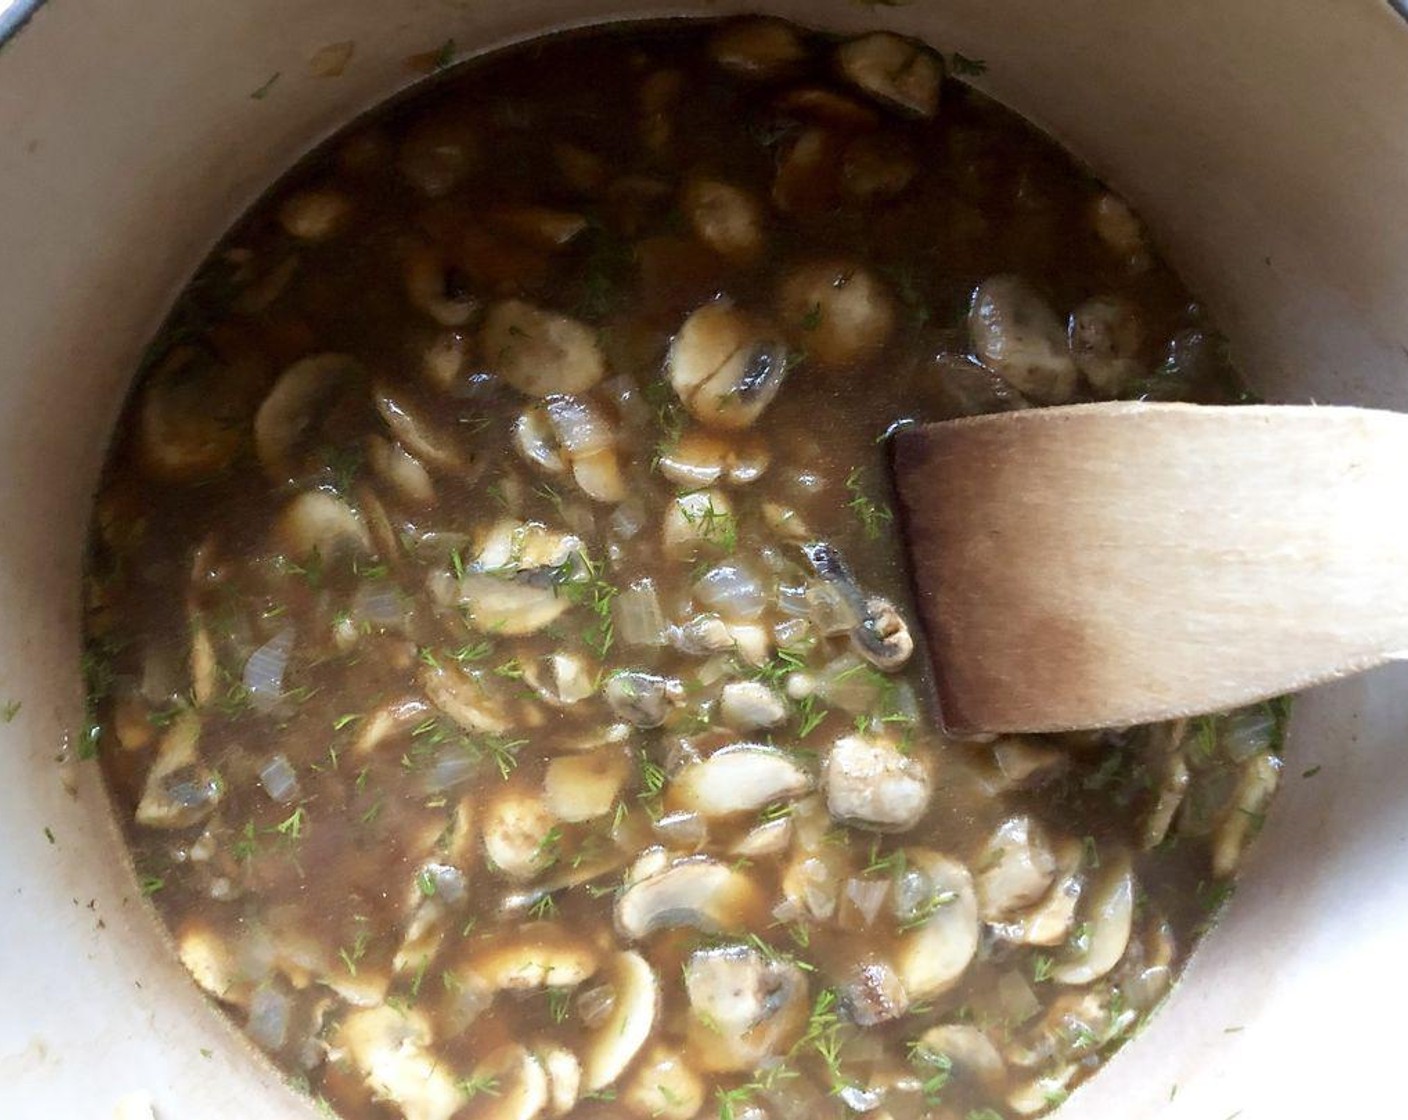 step 2 Add Button Mushrooms (5 cups) and sauté for 5 more minutes. Stir in the Fresh Dill (1 Tbsp), Hungarian Paprika (1 Tbsp), Low-Sodium Soy Sauce (1 Tbsp), and Chicken Broth (2 cups). Reduce heat to low, cover, and simmer for 15 minutes.